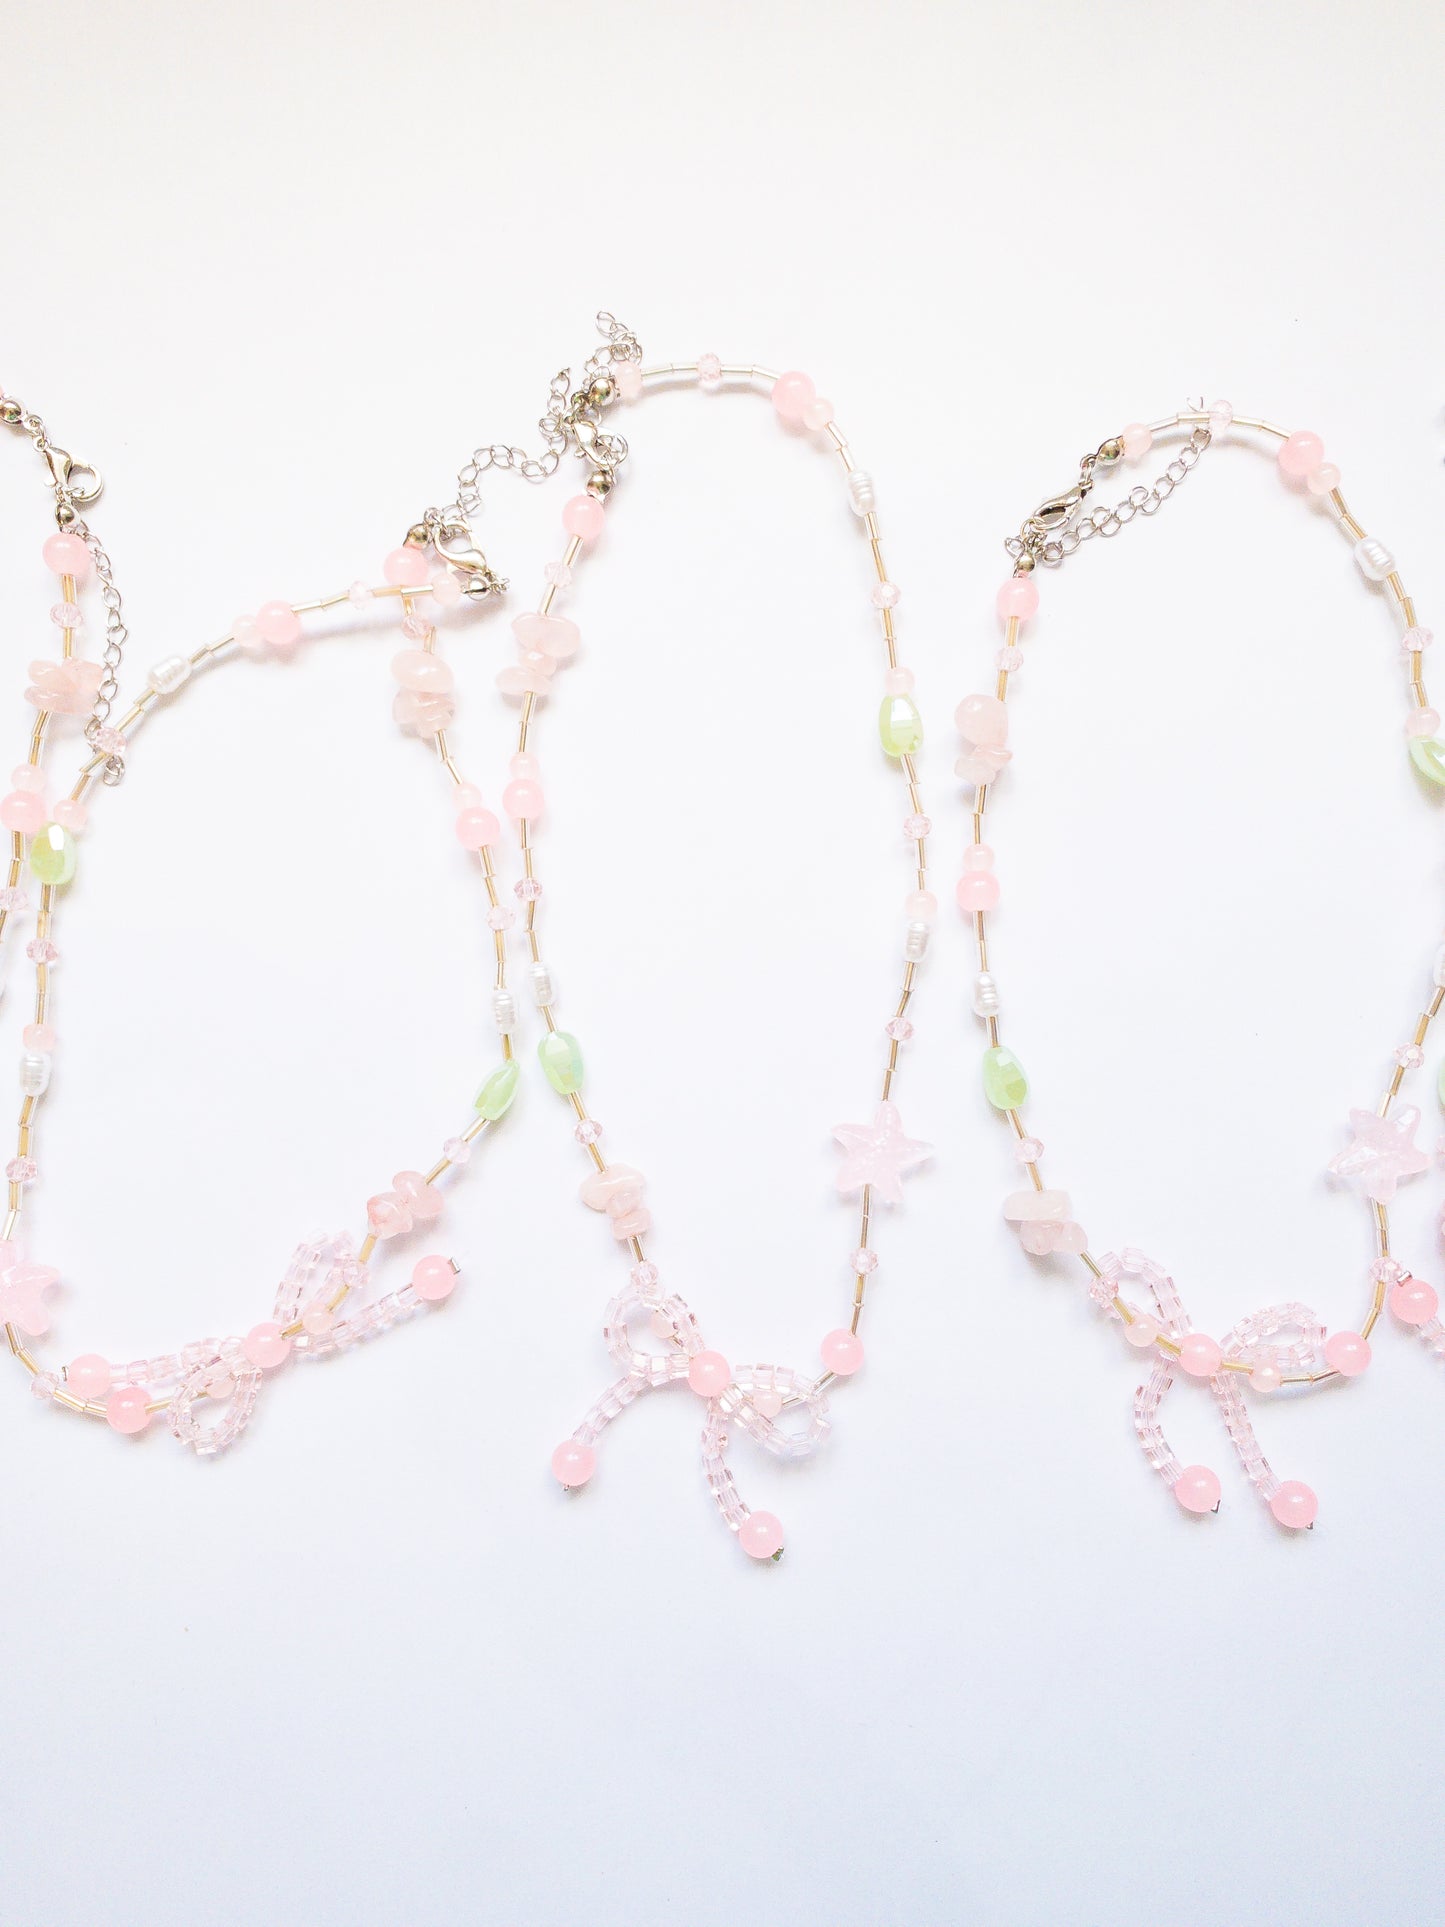 Pretty little beaded bow necklace with light pink and green stones, pearls, and a pink starfish. A subtle and delicate way to add bows to your look.